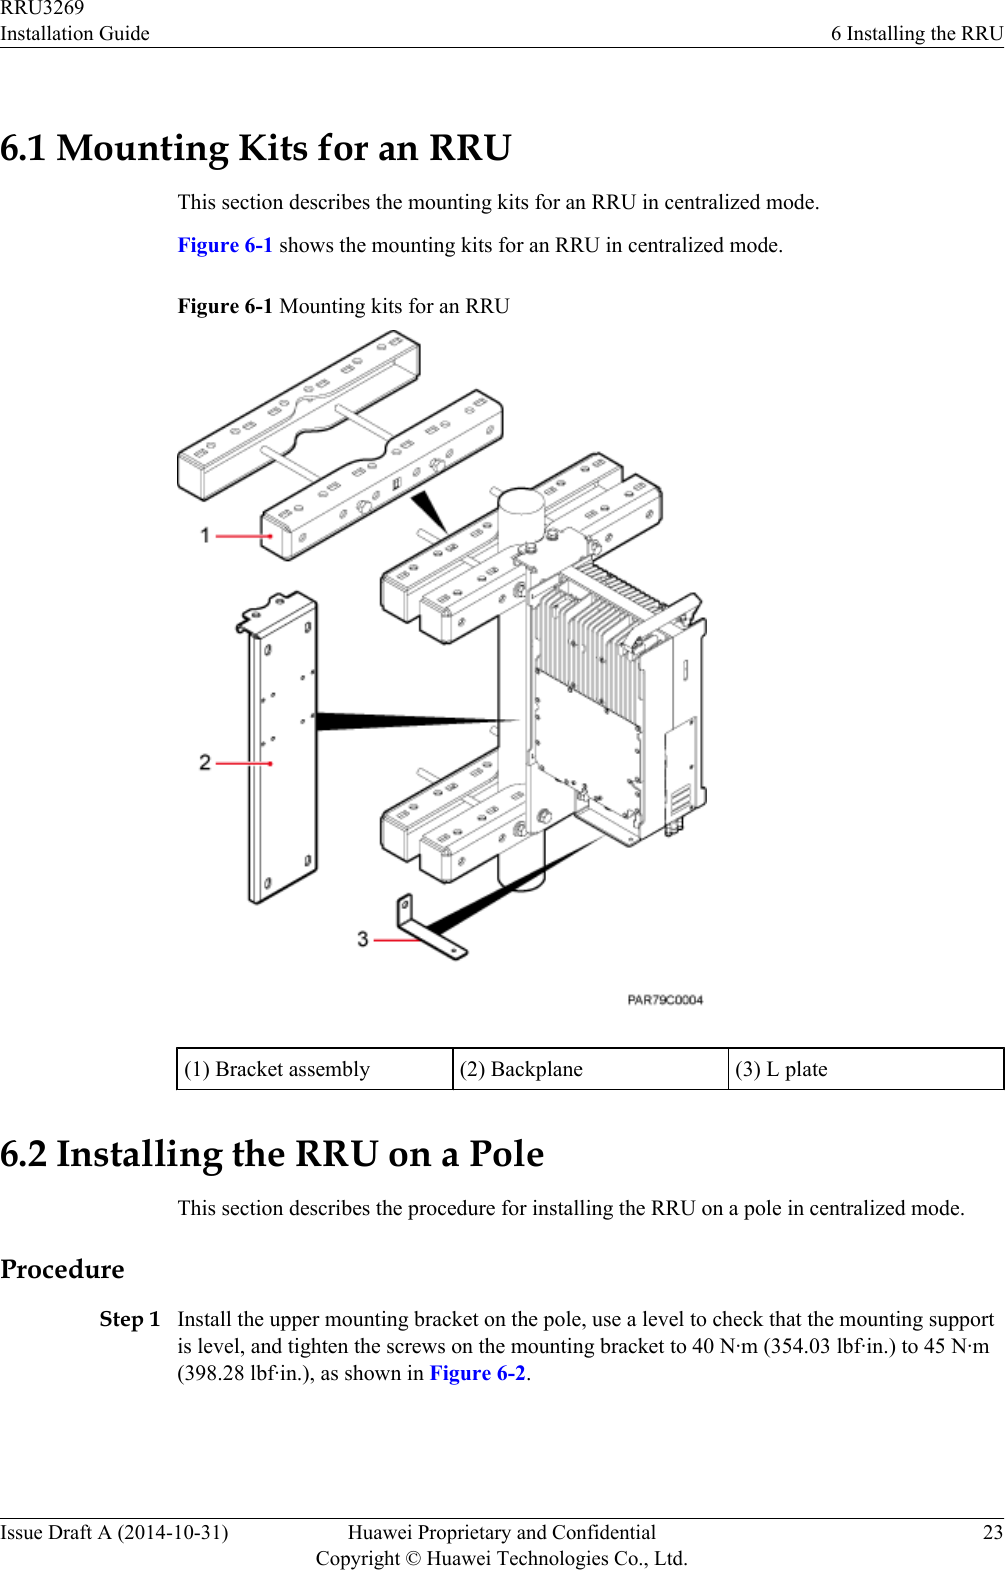 6.1 Mounting Kits for an RRUThis section describes the mounting kits for an RRU in centralized mode.Figure 6-1 shows the mounting kits for an RRU in centralized mode.Figure 6-1 Mounting kits for an RRU(1) Bracket assembly (2) Backplane (3) L plate6.2 Installing the RRU on a PoleThis section describes the procedure for installing the RRU on a pole in centralized mode.ProcedureStep 1 Install the upper mounting bracket on the pole, use a level to check that the mounting supportis level, and tighten the screws on the mounting bracket to 40 N·m (354.03 lbf·in.) to 45 N·m(398.28 lbf·in.), as shown in Figure 6-2.RRU3269Installation Guide 6 Installing the RRUIssue Draft A (2014-10-31) Huawei Proprietary and ConfidentialCopyright © Huawei Technologies Co., Ltd.23